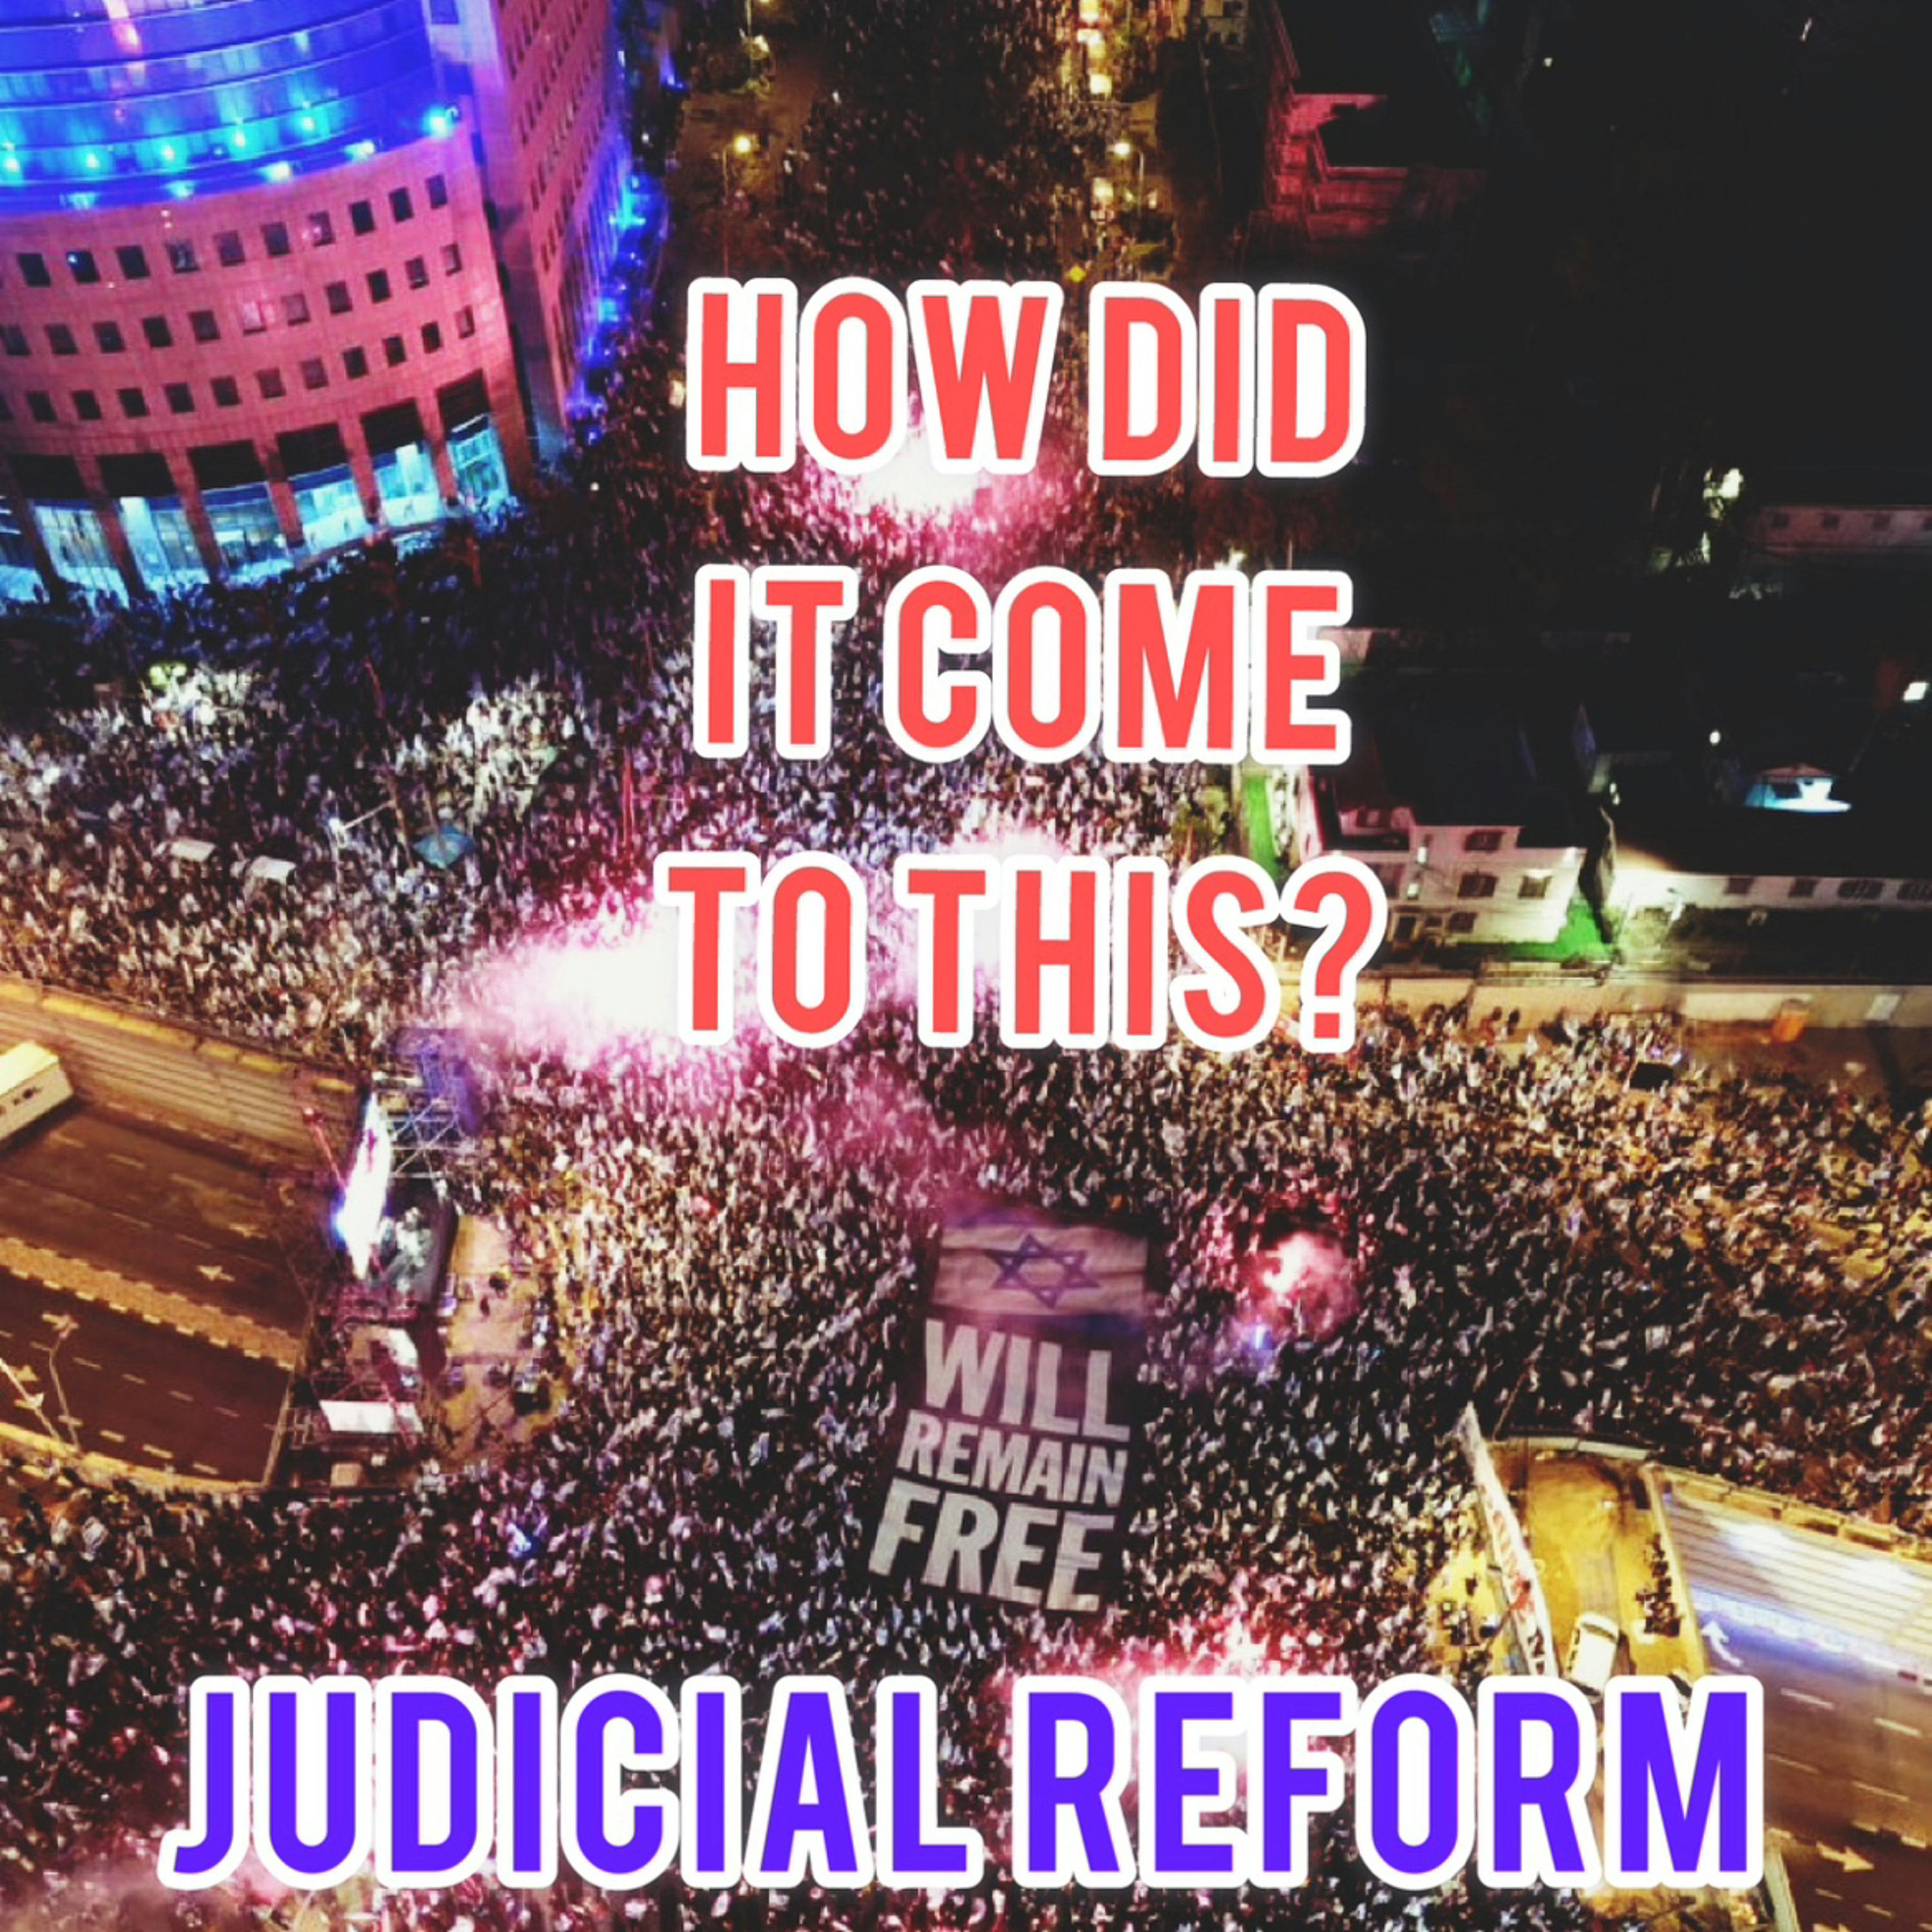 109: Judicial Reform crisis: “If one side wins Israel will lose. We must stay Jewish, democratic”